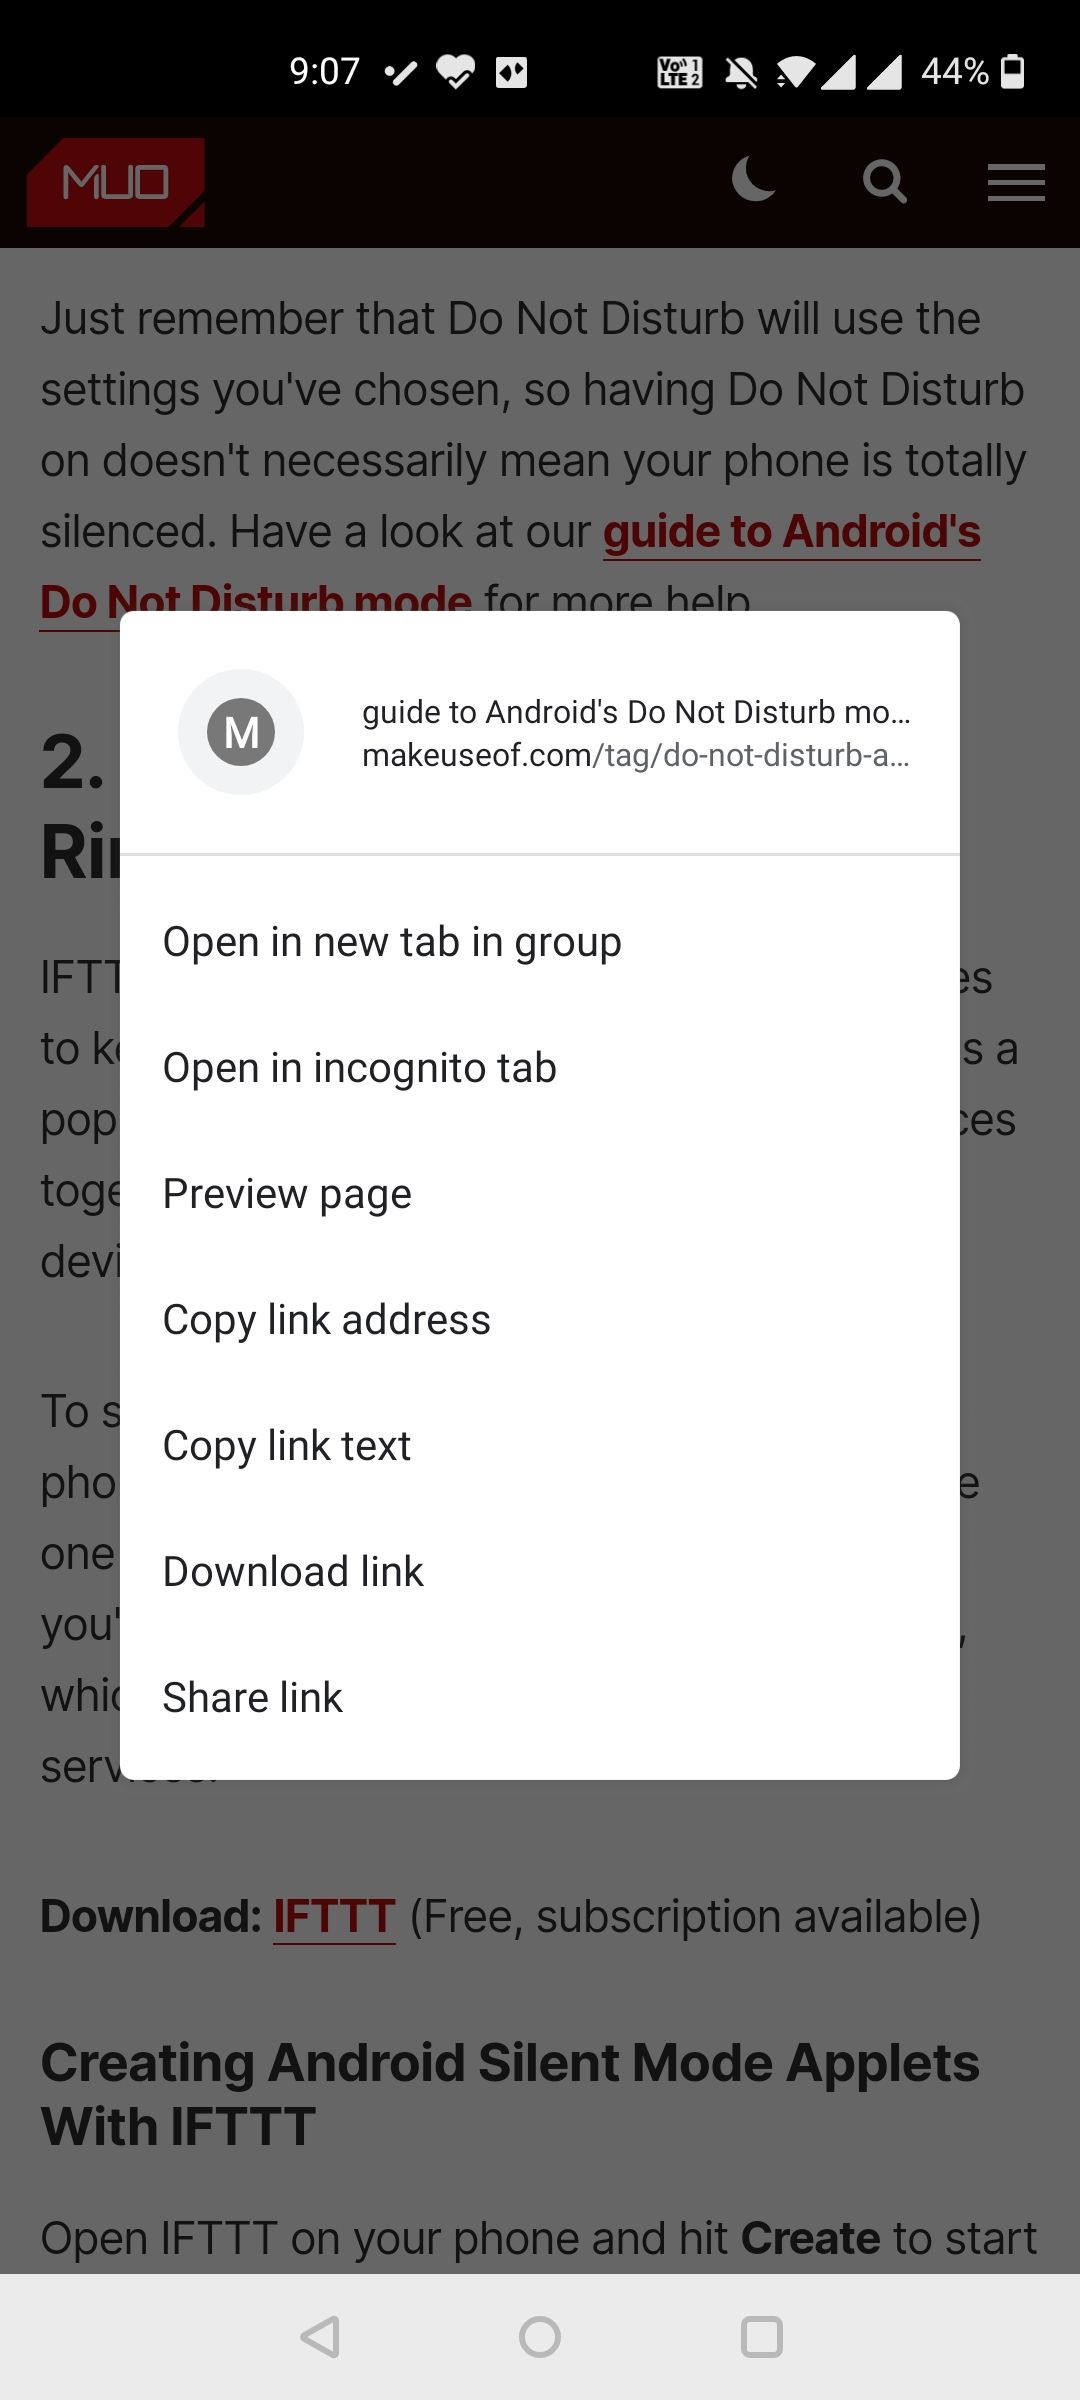 Preview a page in Chrome for Android